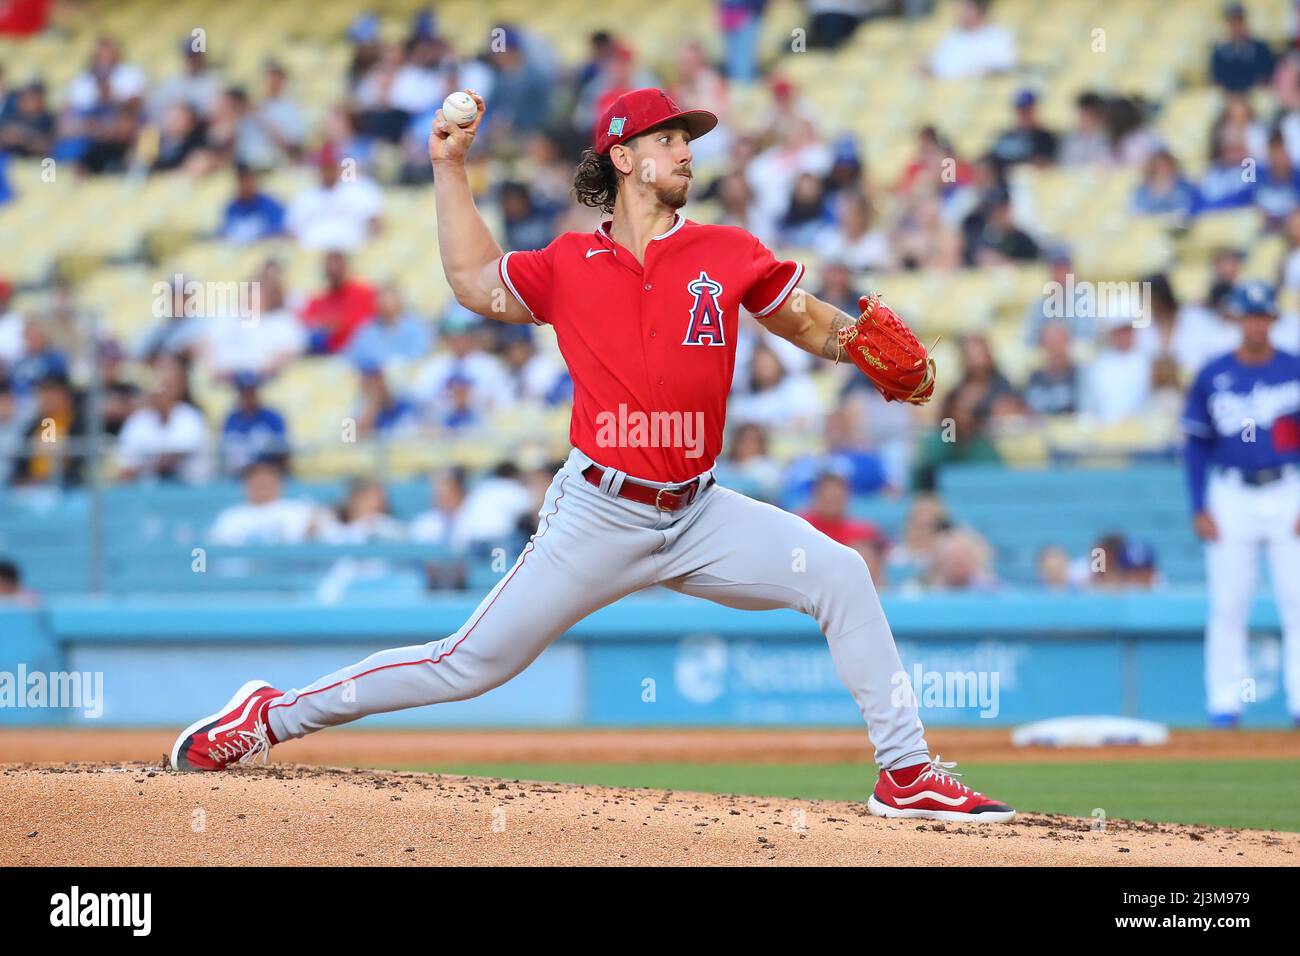 Los Angeles, United States. 05th Apr, 2022. Los Angeles Angels pitcher  Michael Lorenzen (25) during a MLB spring training baseball game against  the Los Angeles Dodgers, Tuesday, Apr. 5, 2022, in Los